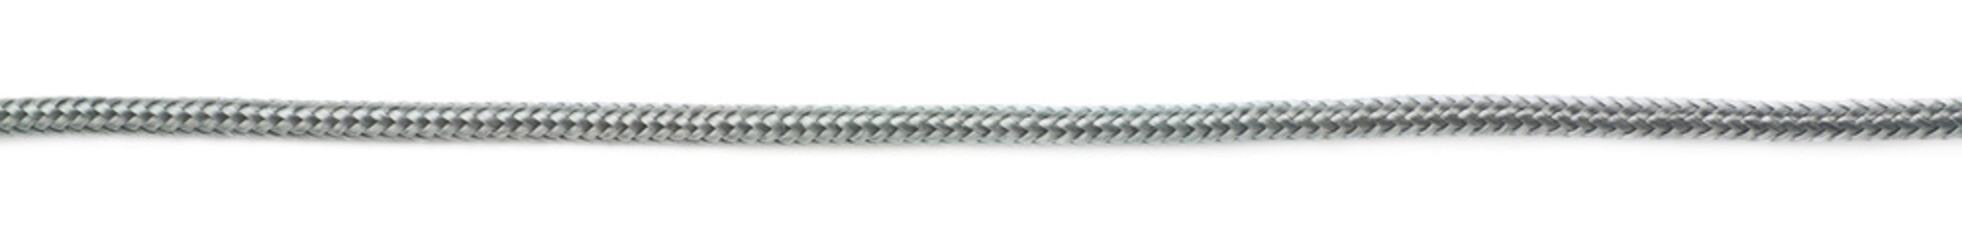 Fragment of gray rope isolated